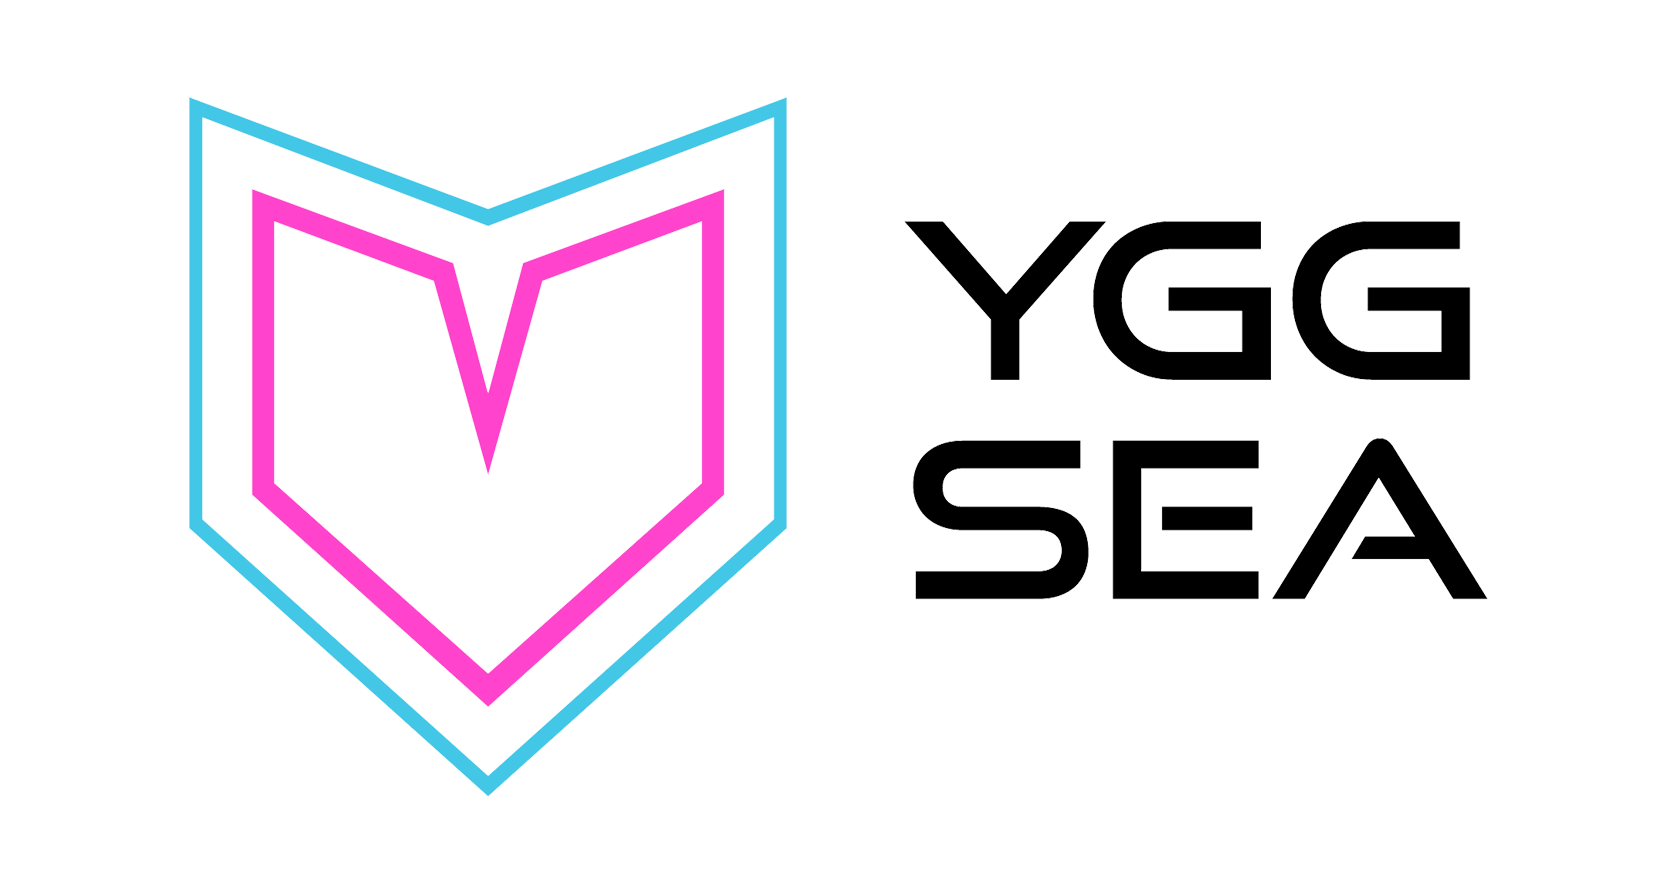 About YGGsea